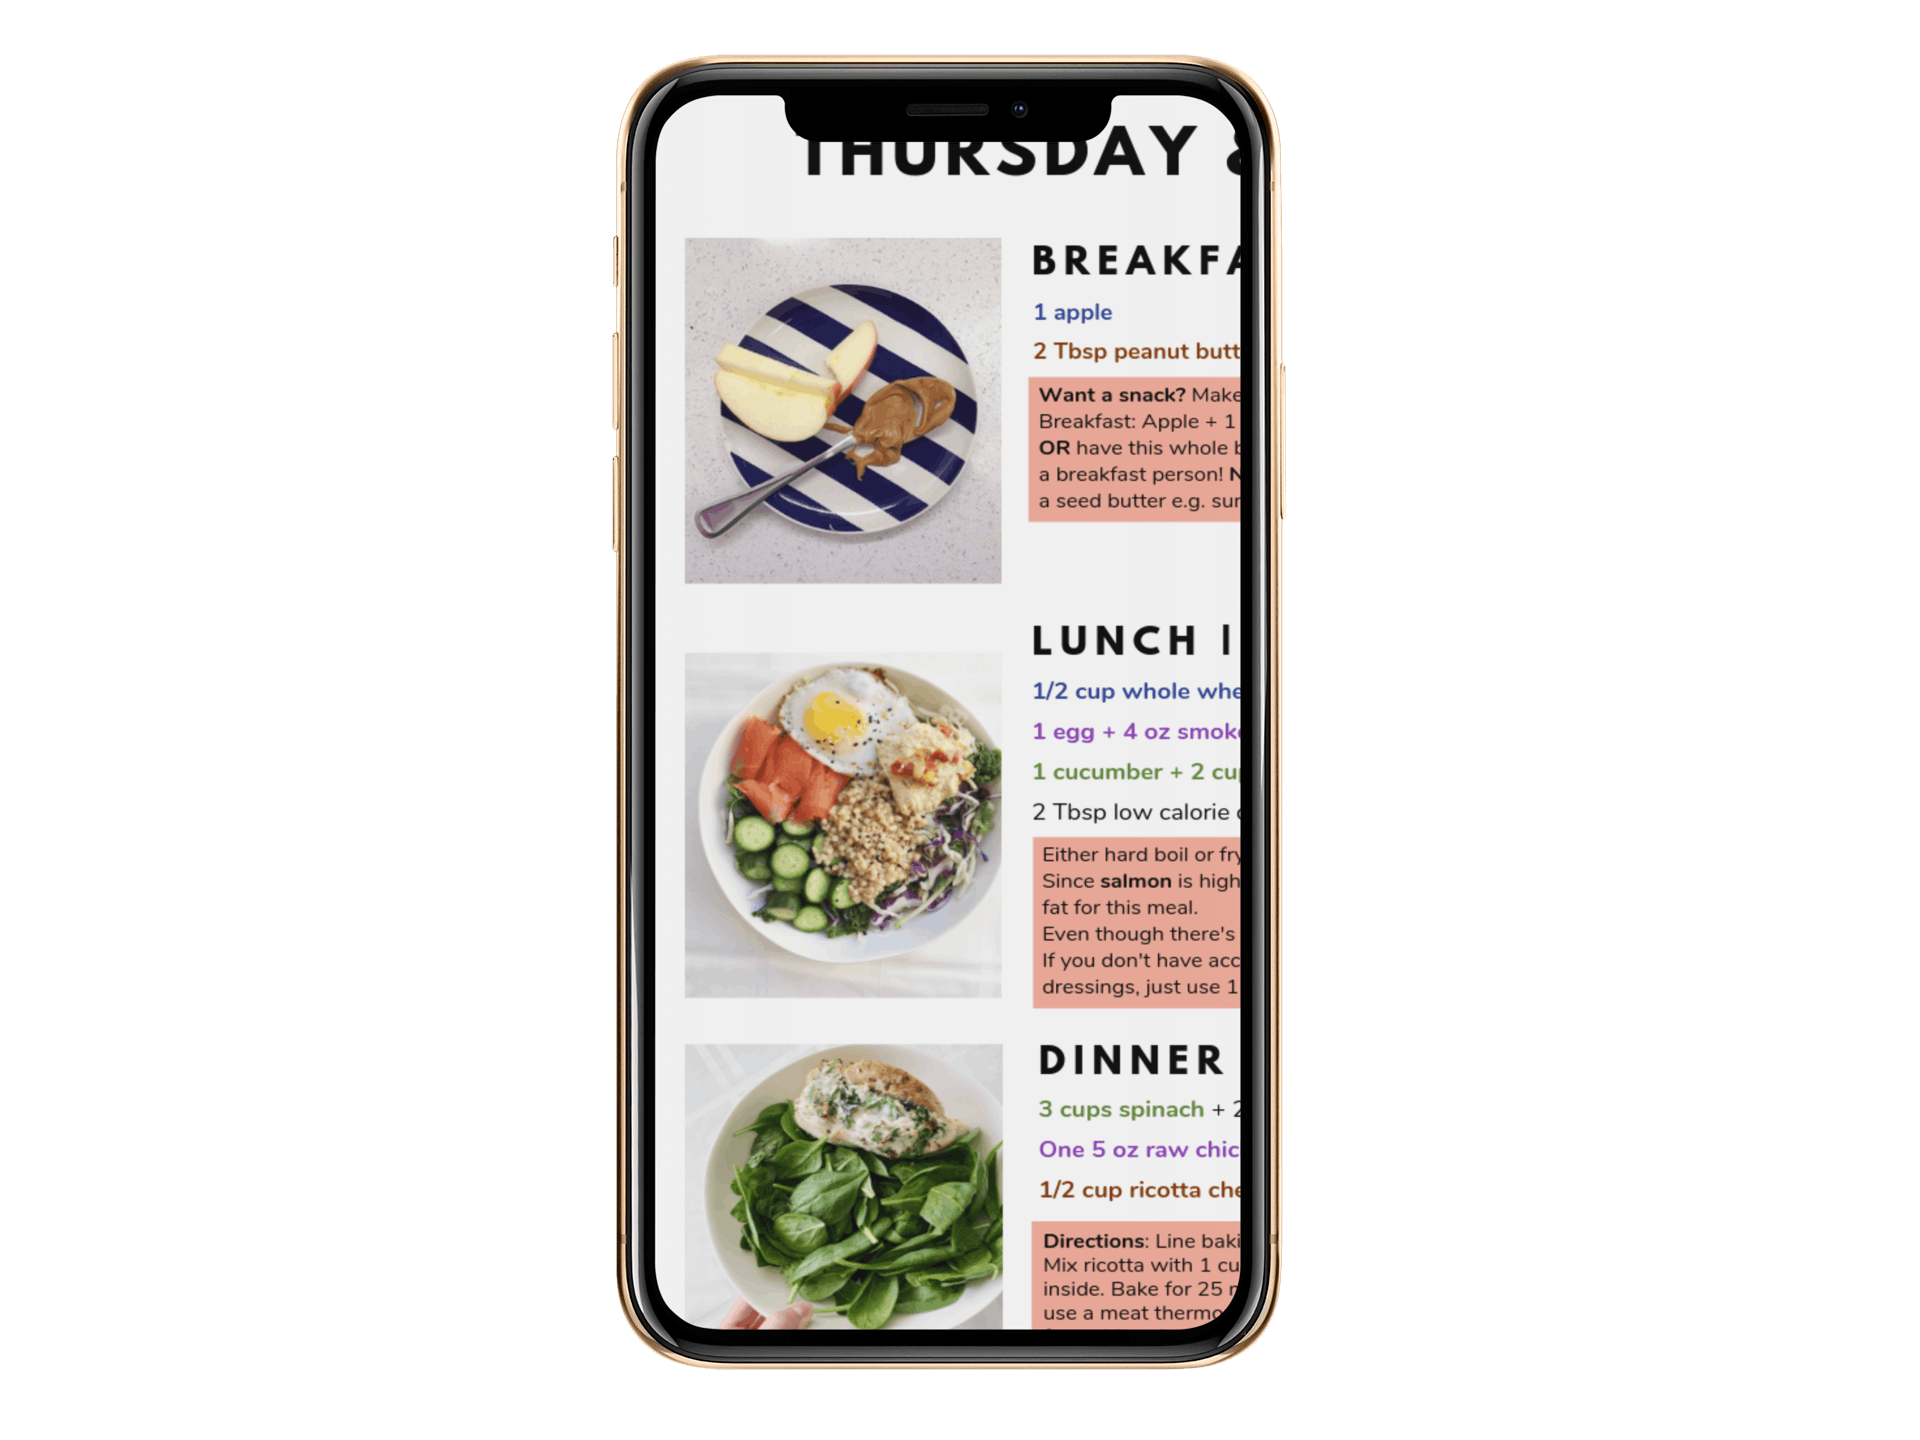 Healthy No Cook Meals For College Students